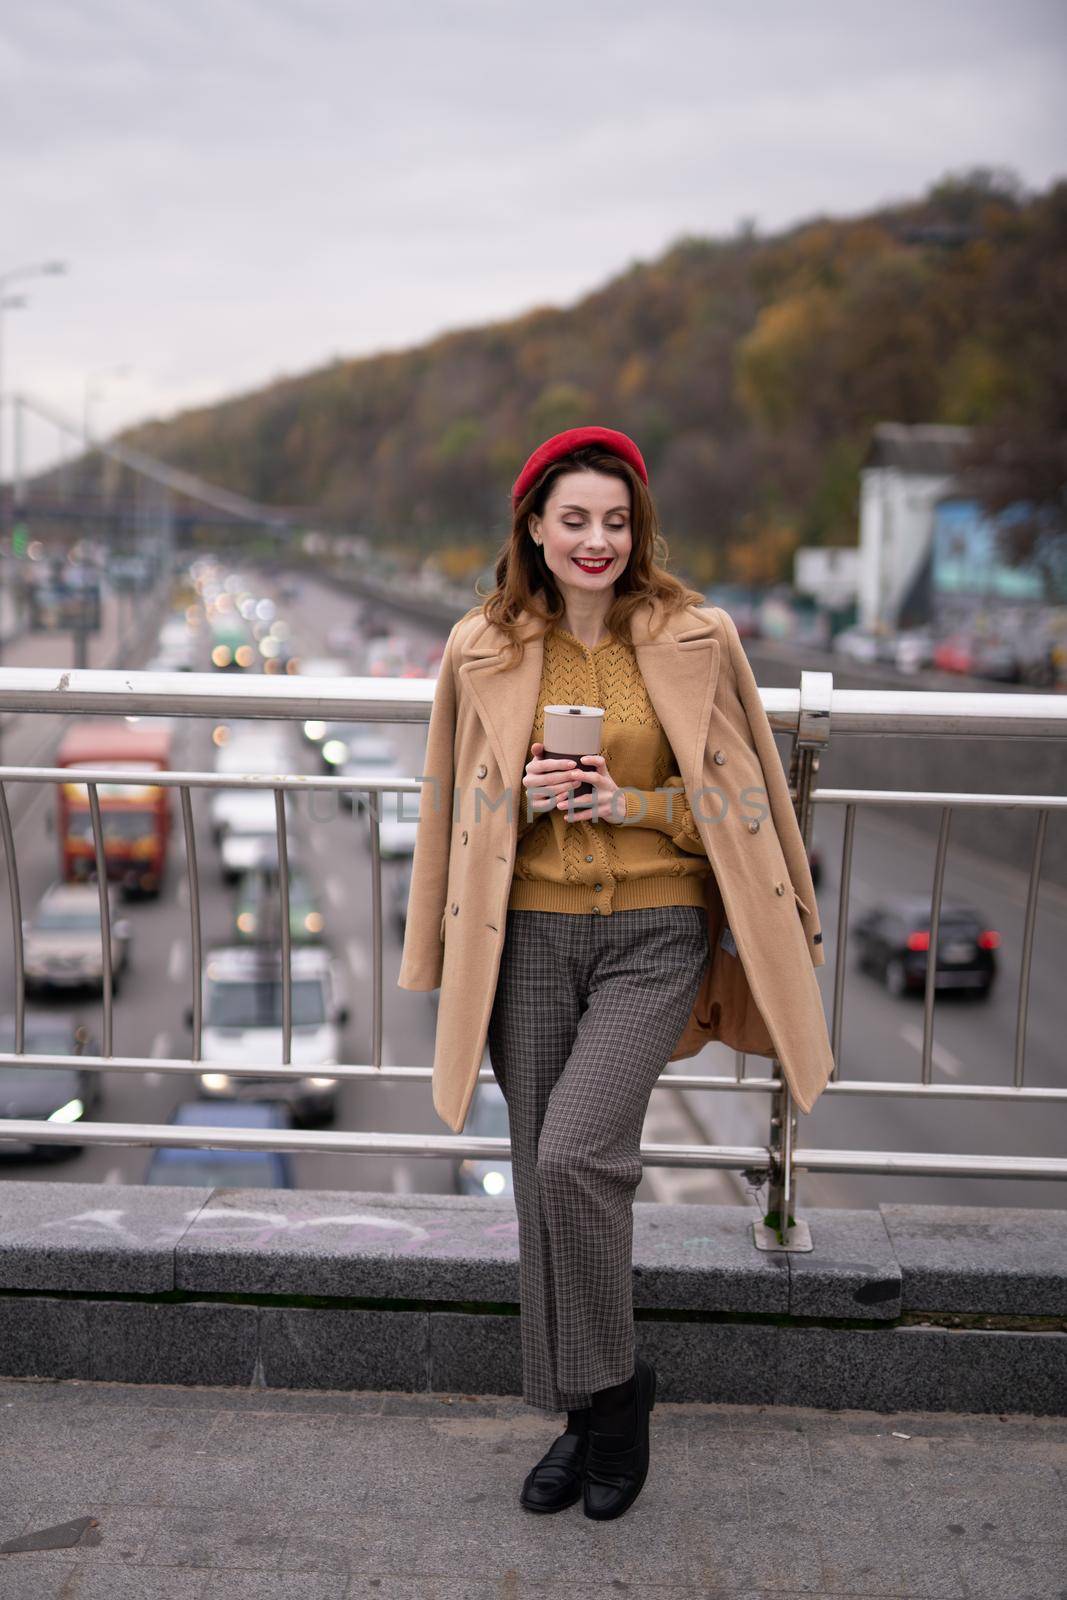 Charming french young woman drinks coffee using a coffee mug looking at camera smiling standing at pedestrian bridge with cars on the road. Looking happy fashion girl in a red beret and beige coat by LipikStockMedia